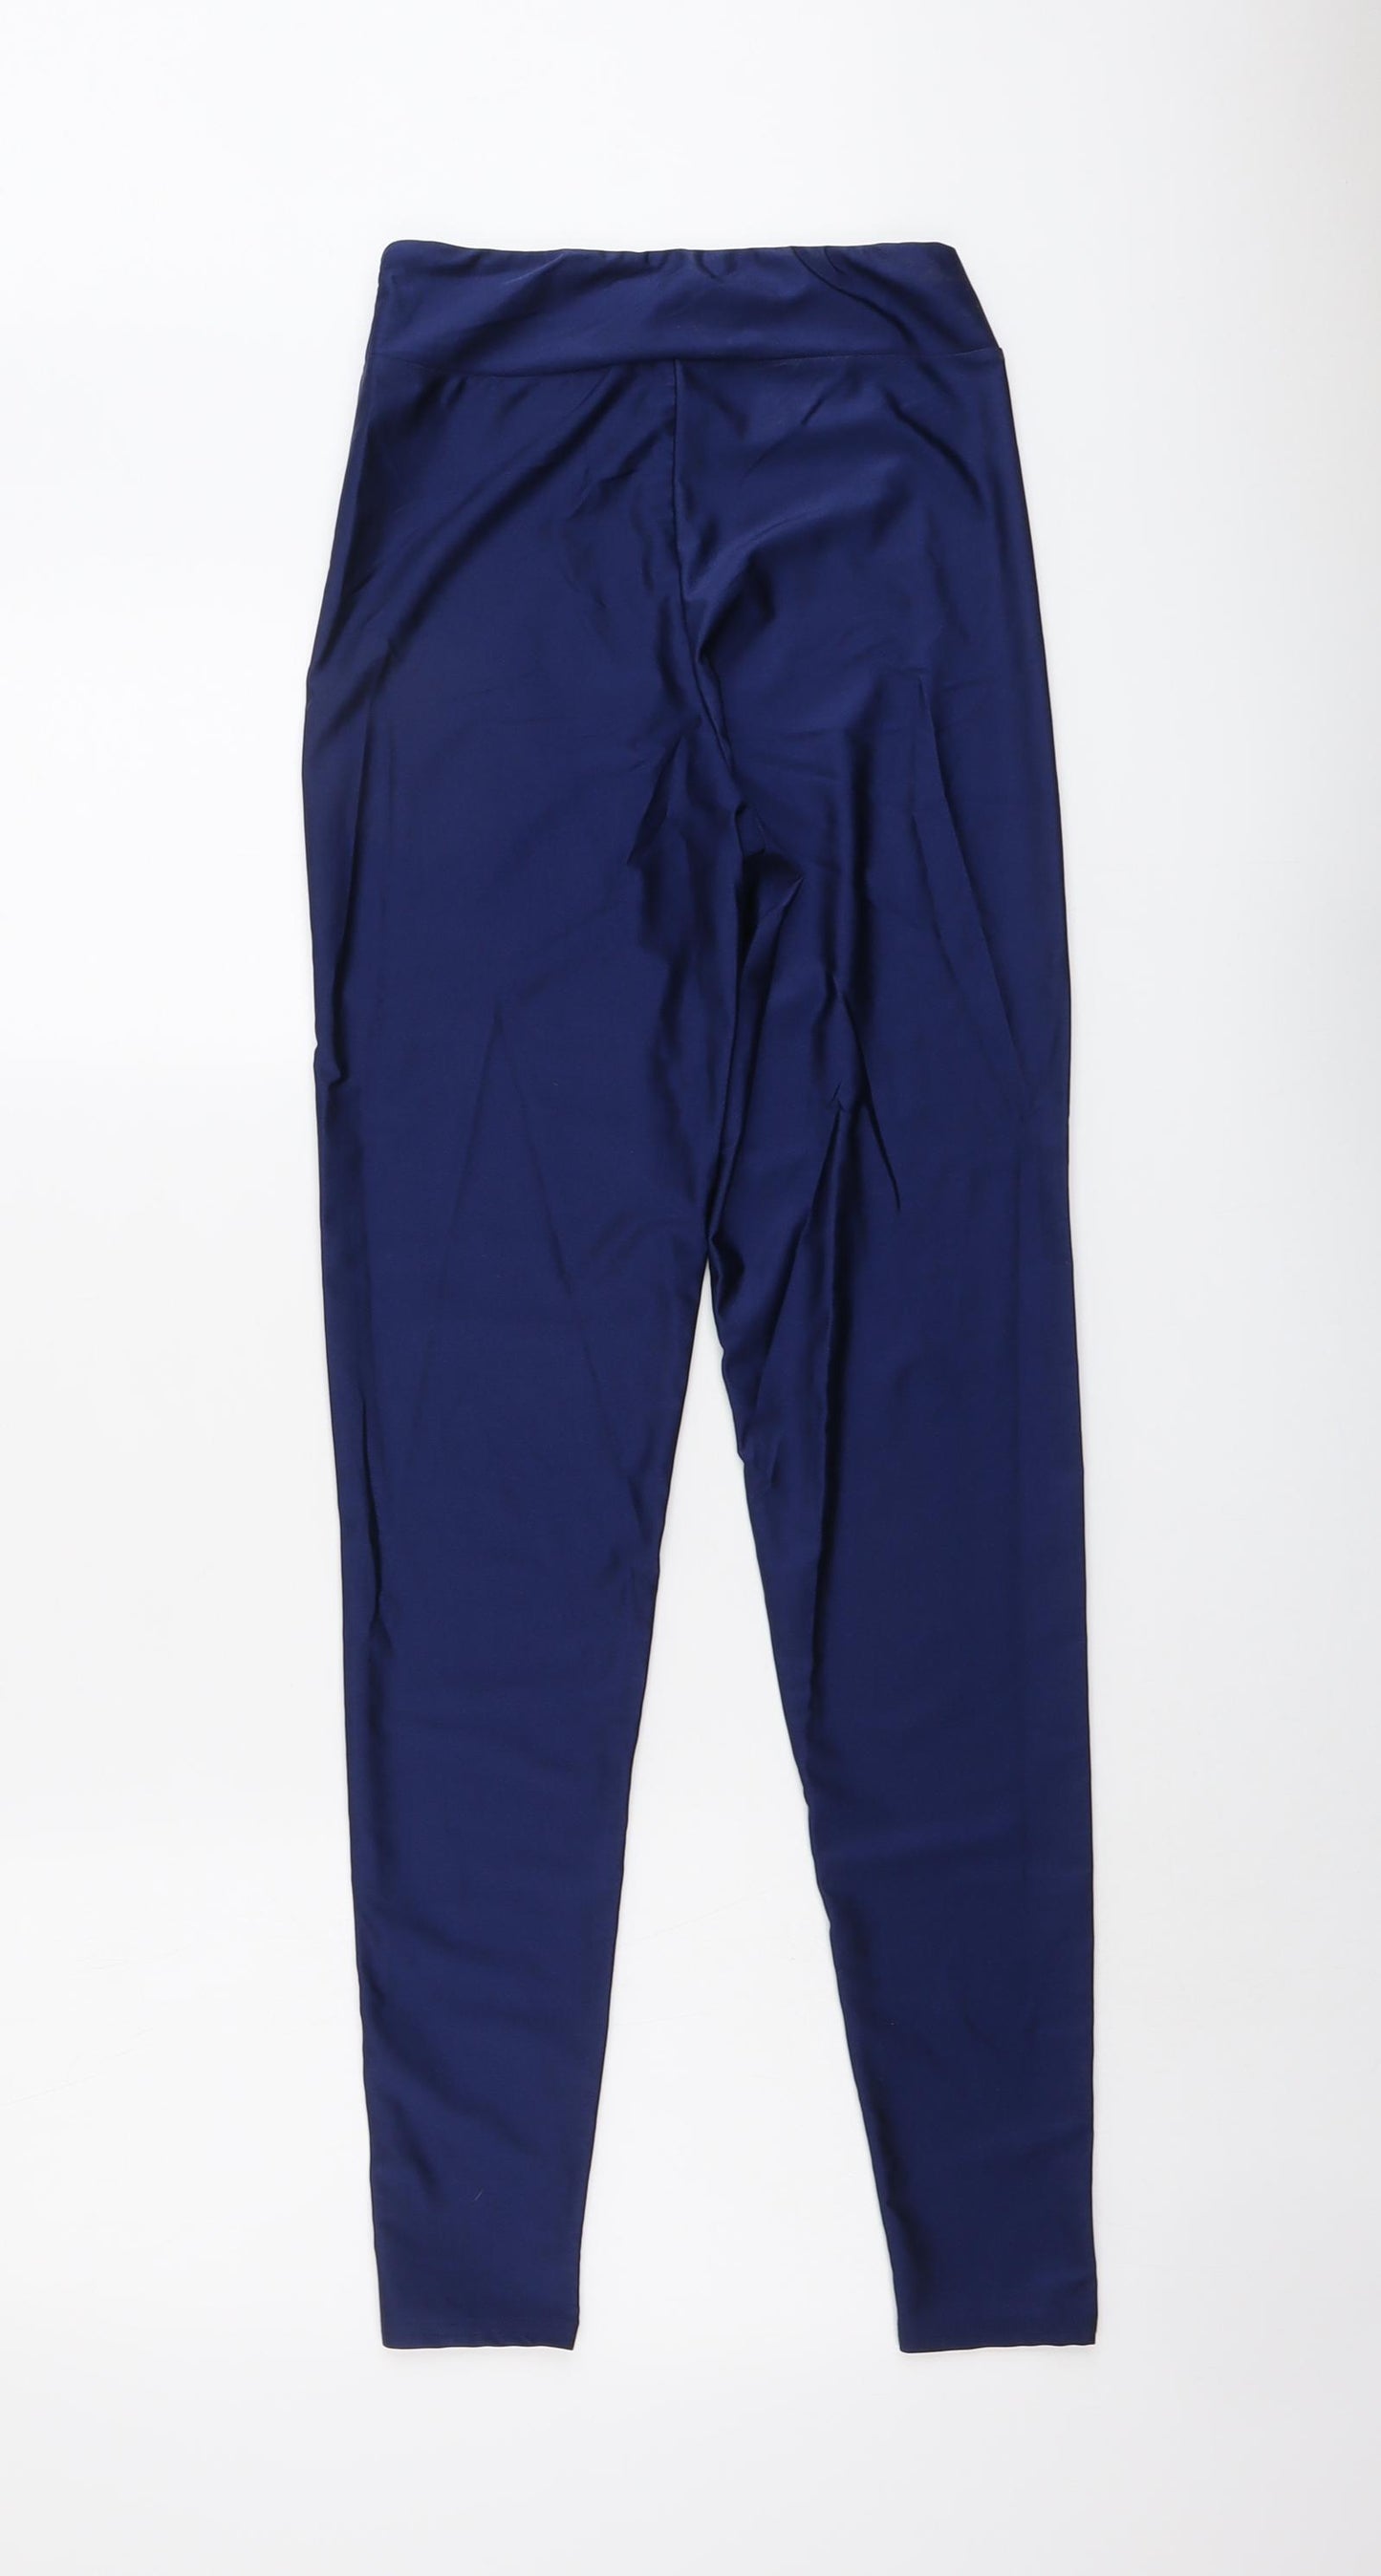 PRETTYLITTLETHING Womens Blue Polyester Chino Leggings Size 8 L28 in